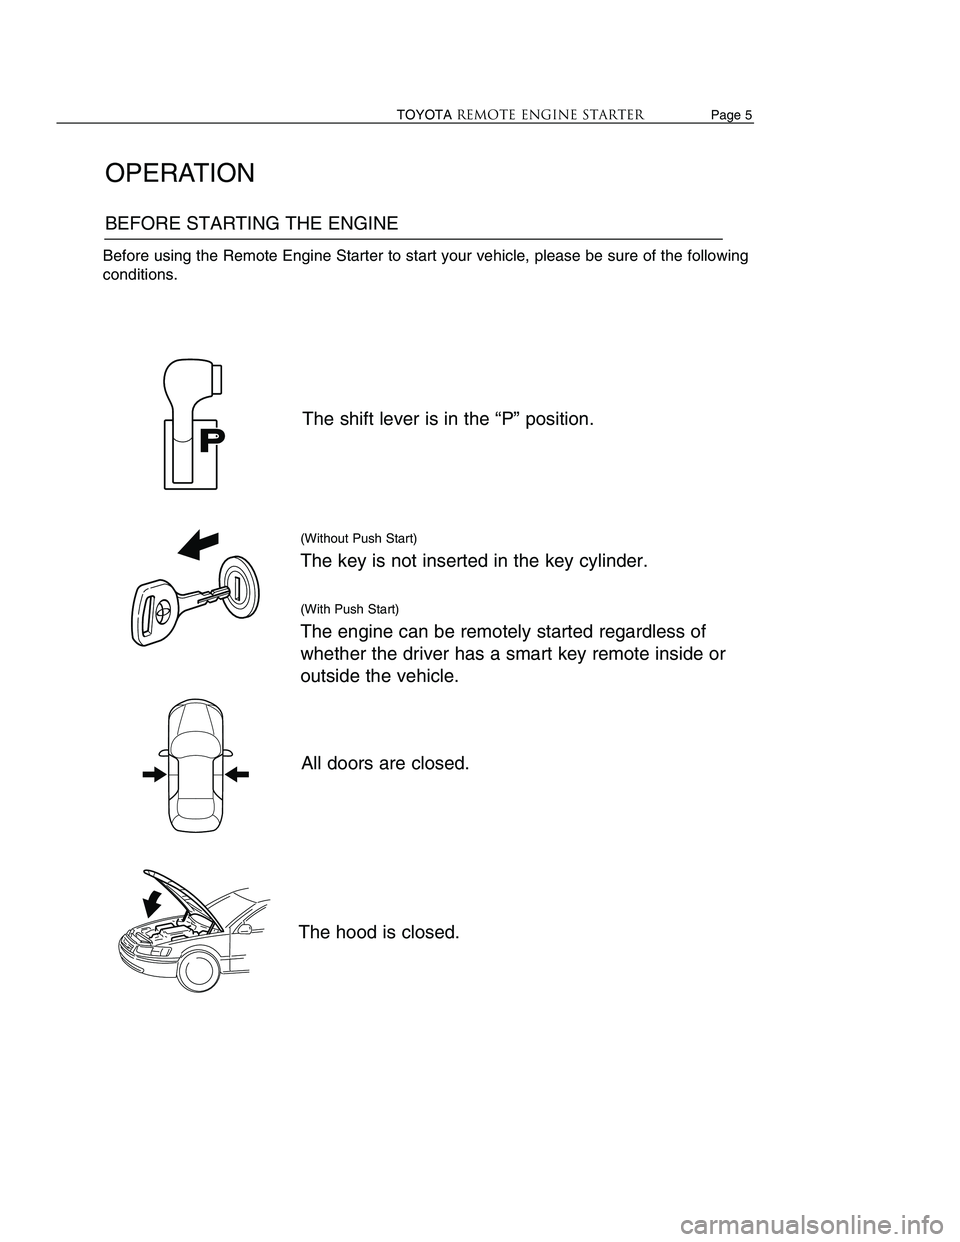 TOYOTA VENZA 2009  Accessories, Audio & Navigation (in English) Page 8                    TOYOTAREMOTE ENGINE STARTERTOYOTAREMOTE ENGINE STARTER Page 5
OPERATION
BEFORE STARTING THE ENGINE
The shift lever is in the “P” position.
(Without Push Start)
The key is